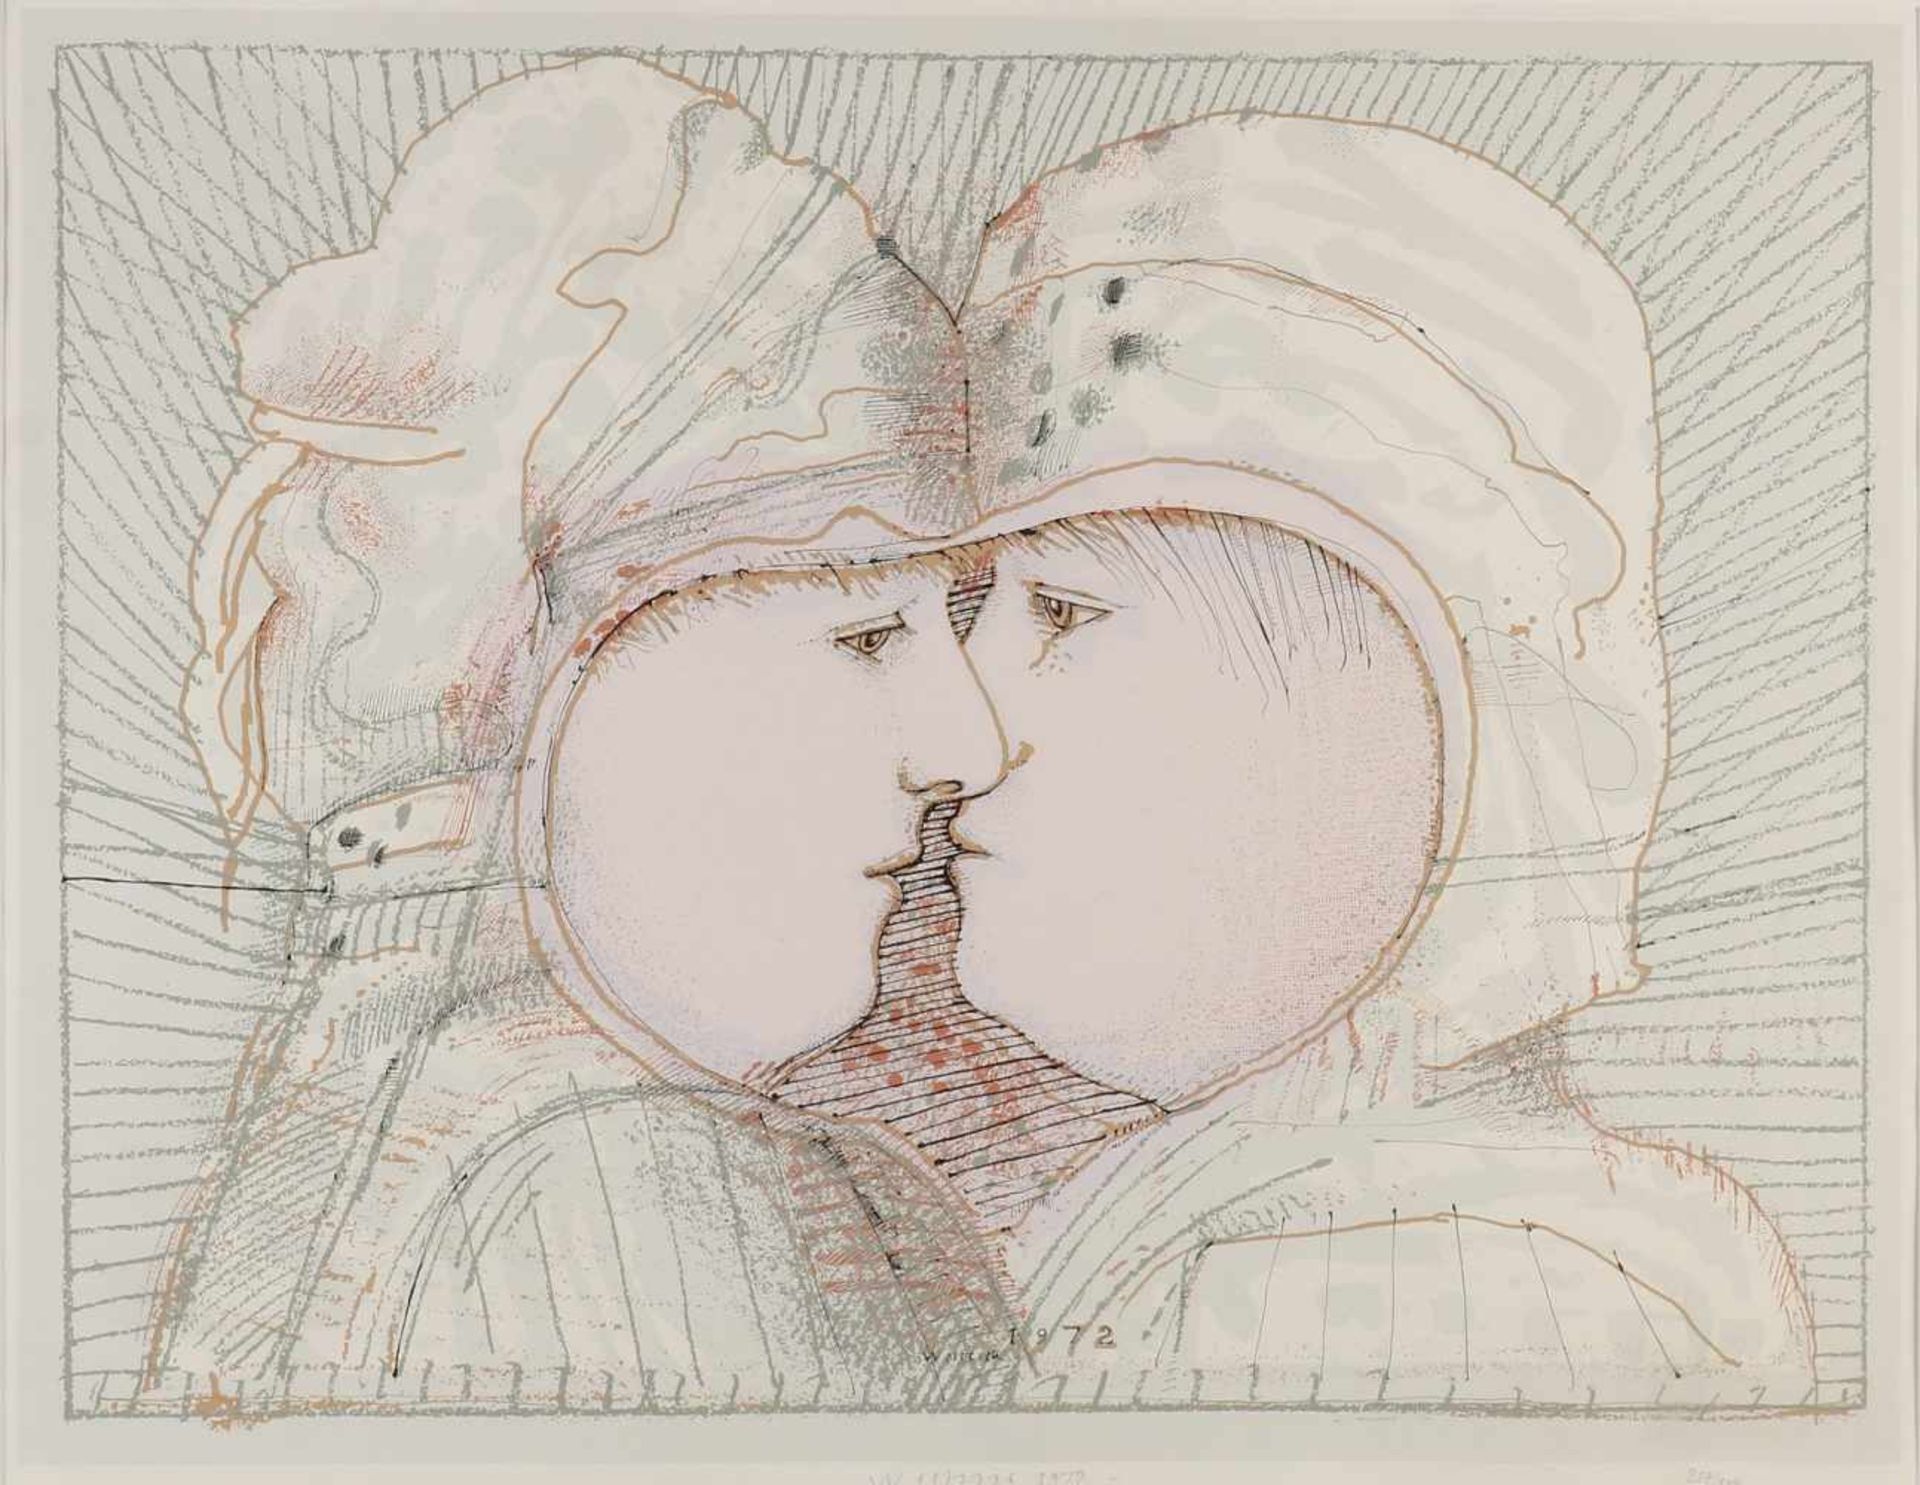 Co Westerik. 1972. 1924 - 2018 Nr. 254/300. Two people kissing. Lithograph on paper. Size: 54 x H, B